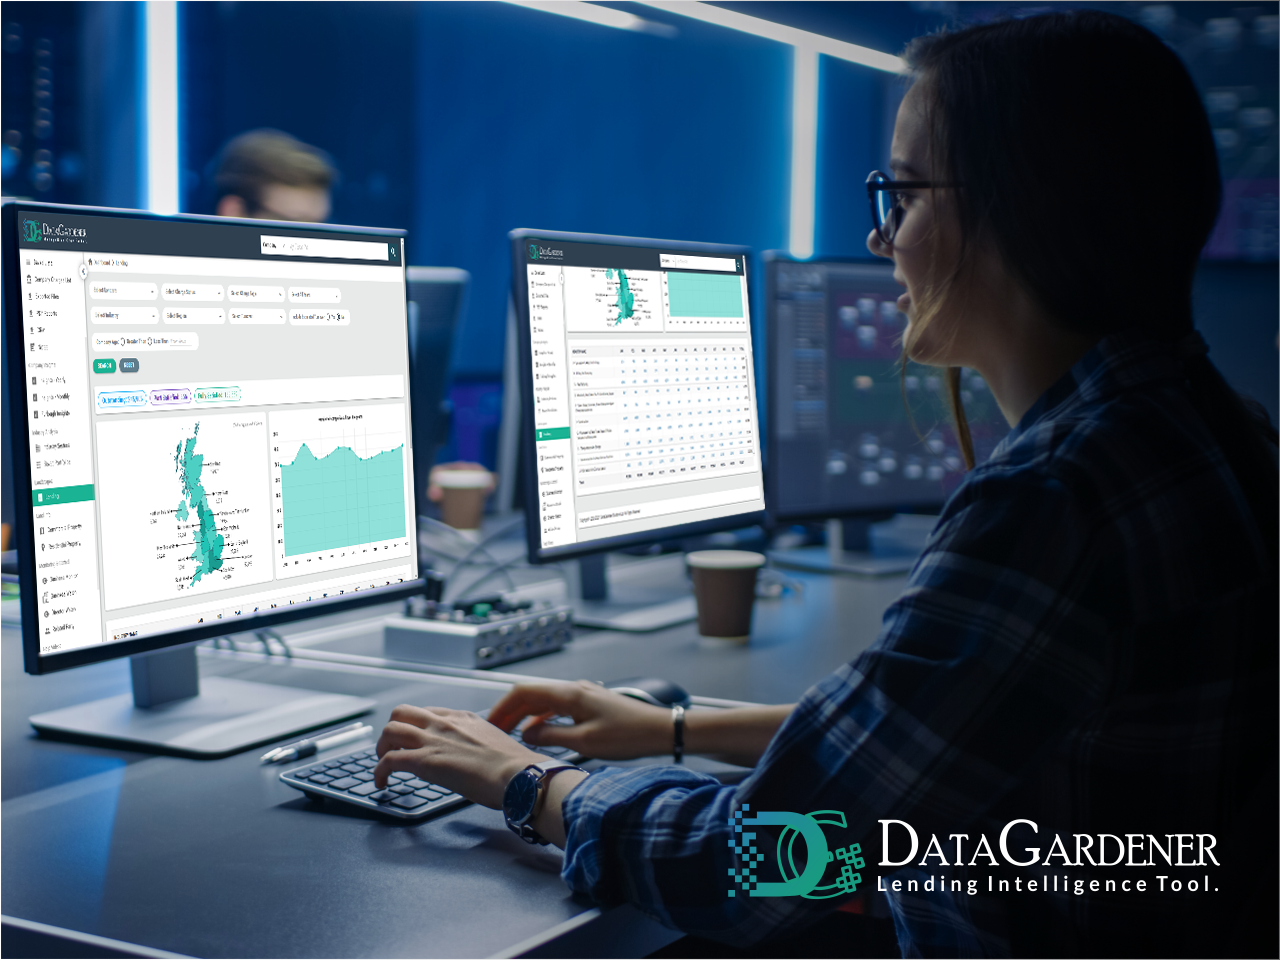 DataGardener Launches its Lending Intelligence Tool, the Industry's First Solution of its kind.